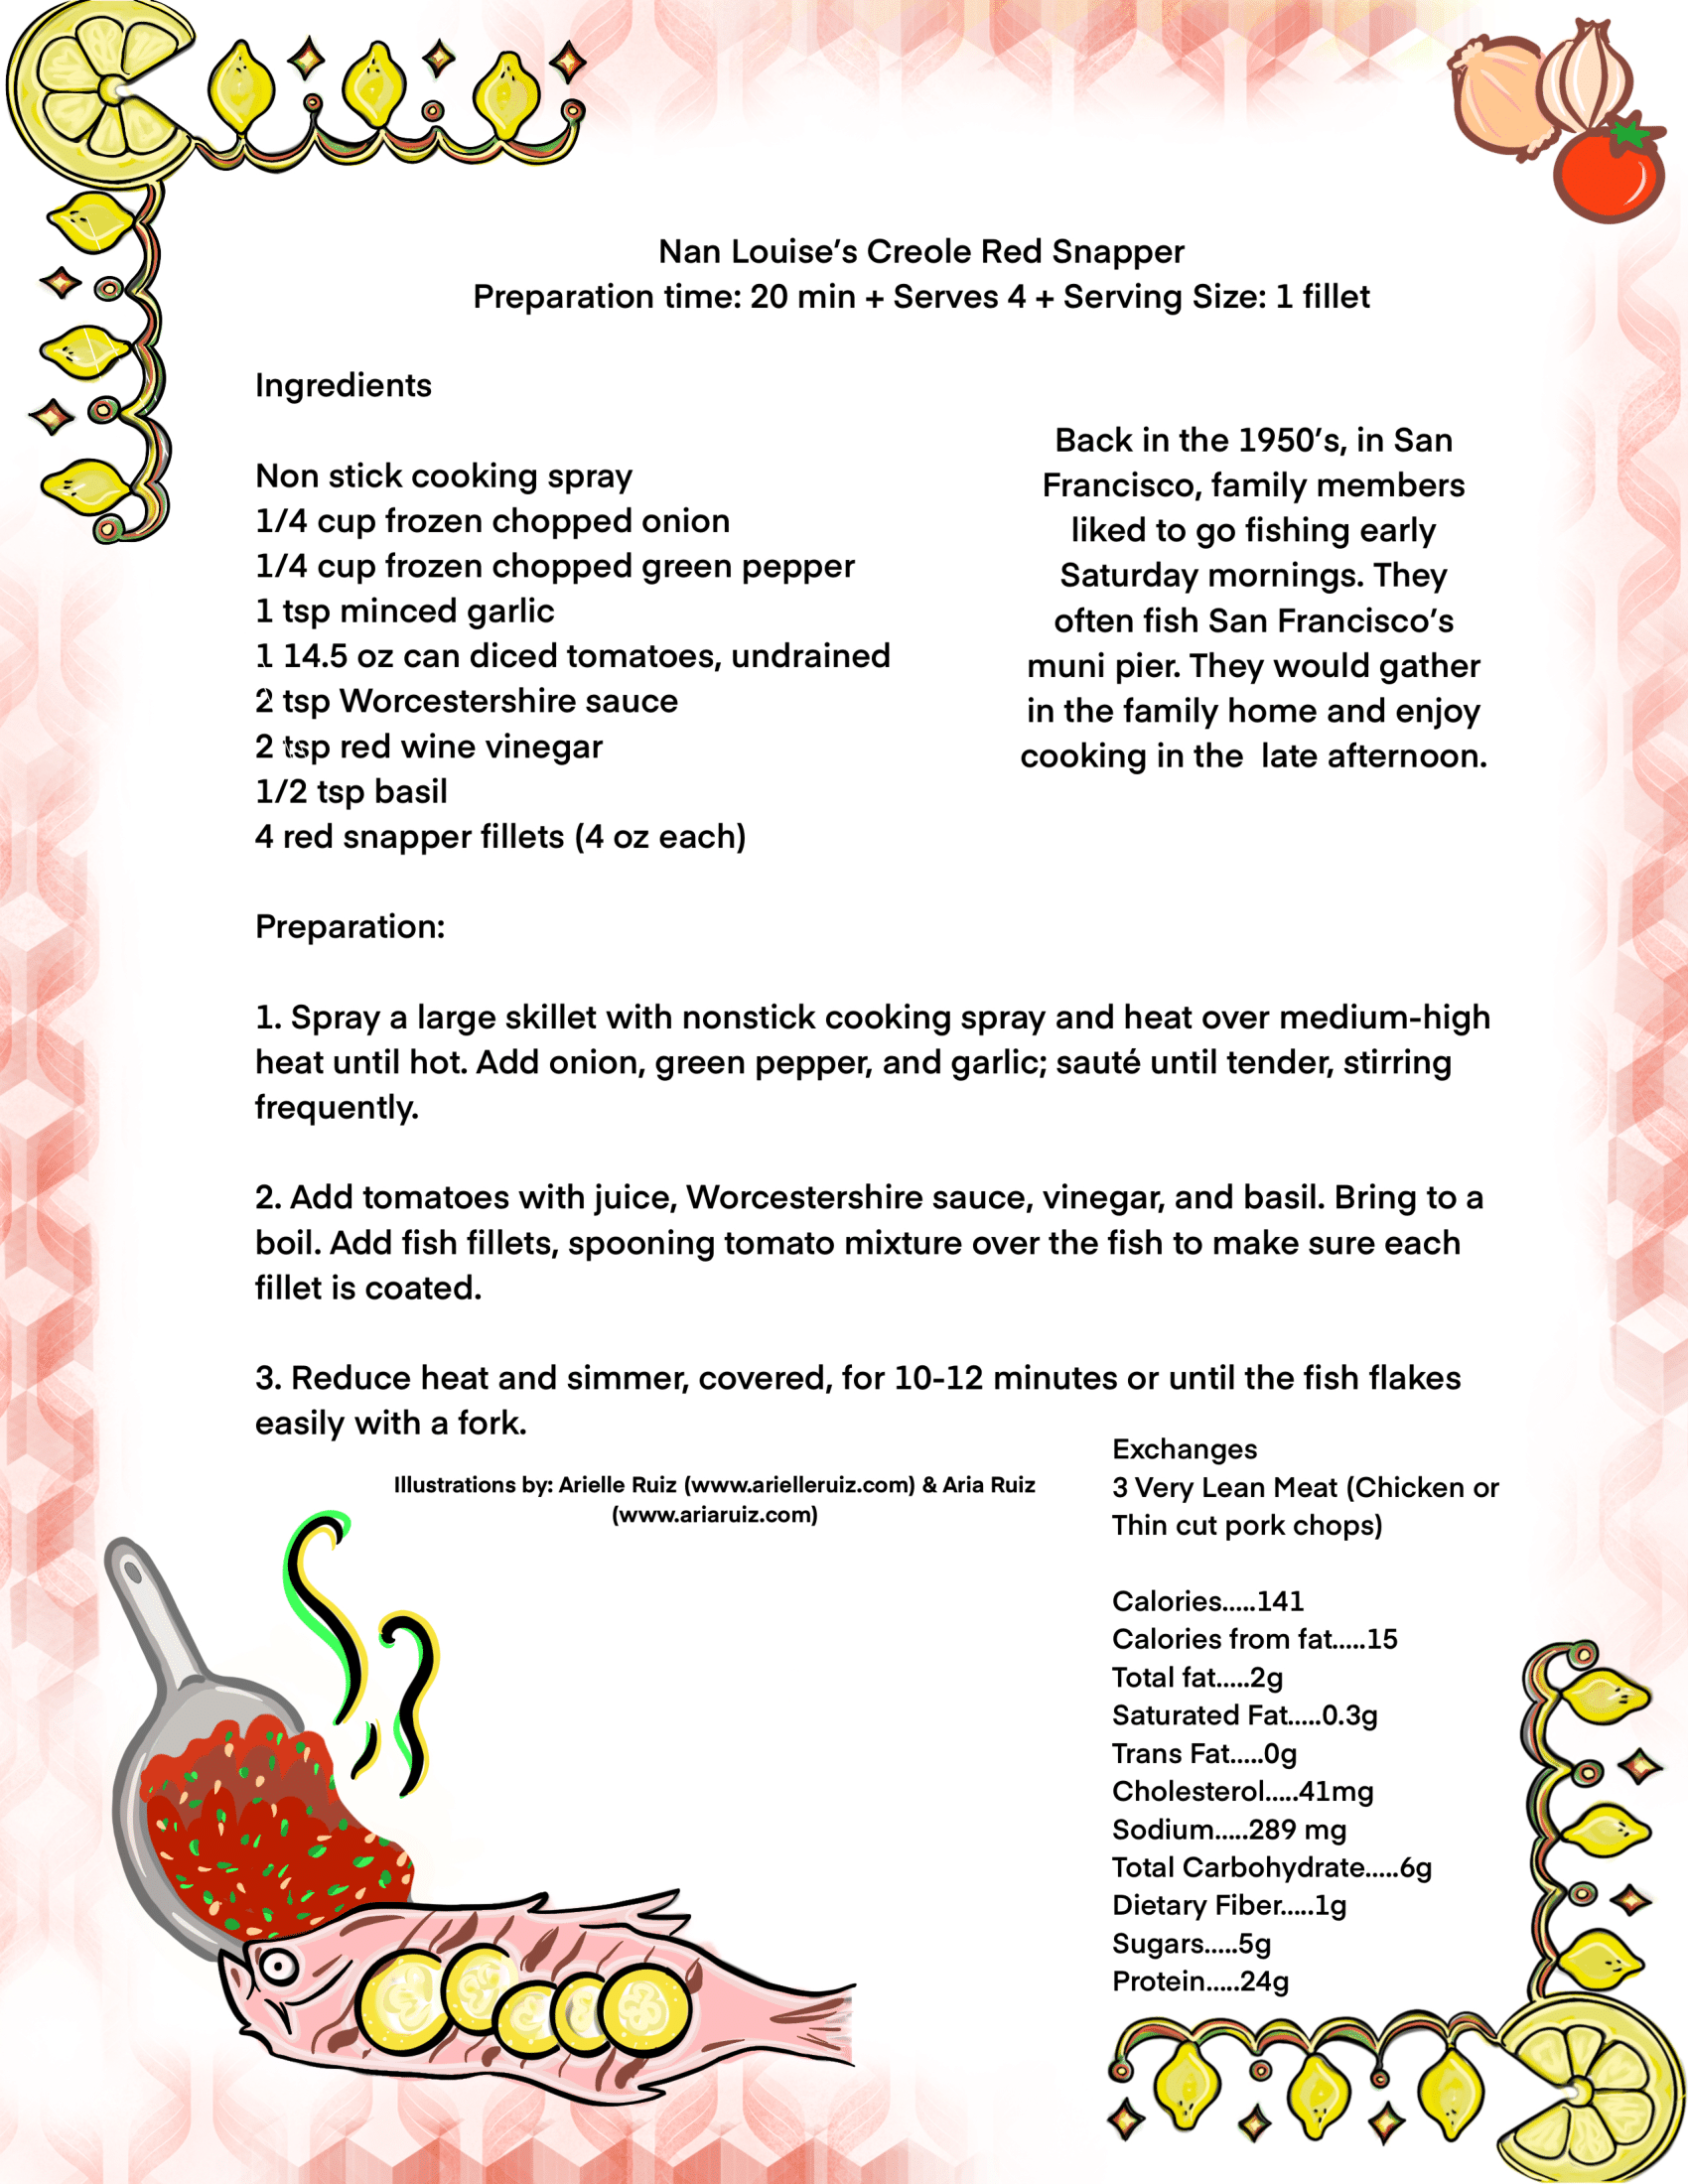 Another recipe is detailed in this photo. The borders of the image are decorated, with the upper left and bottom right corners depicting lemons in th shape of a chandlier or lights. The lower left corner depicts a red snapper with salsa being poured over it, and the upper right depicts garlic, tomato, and lemon.